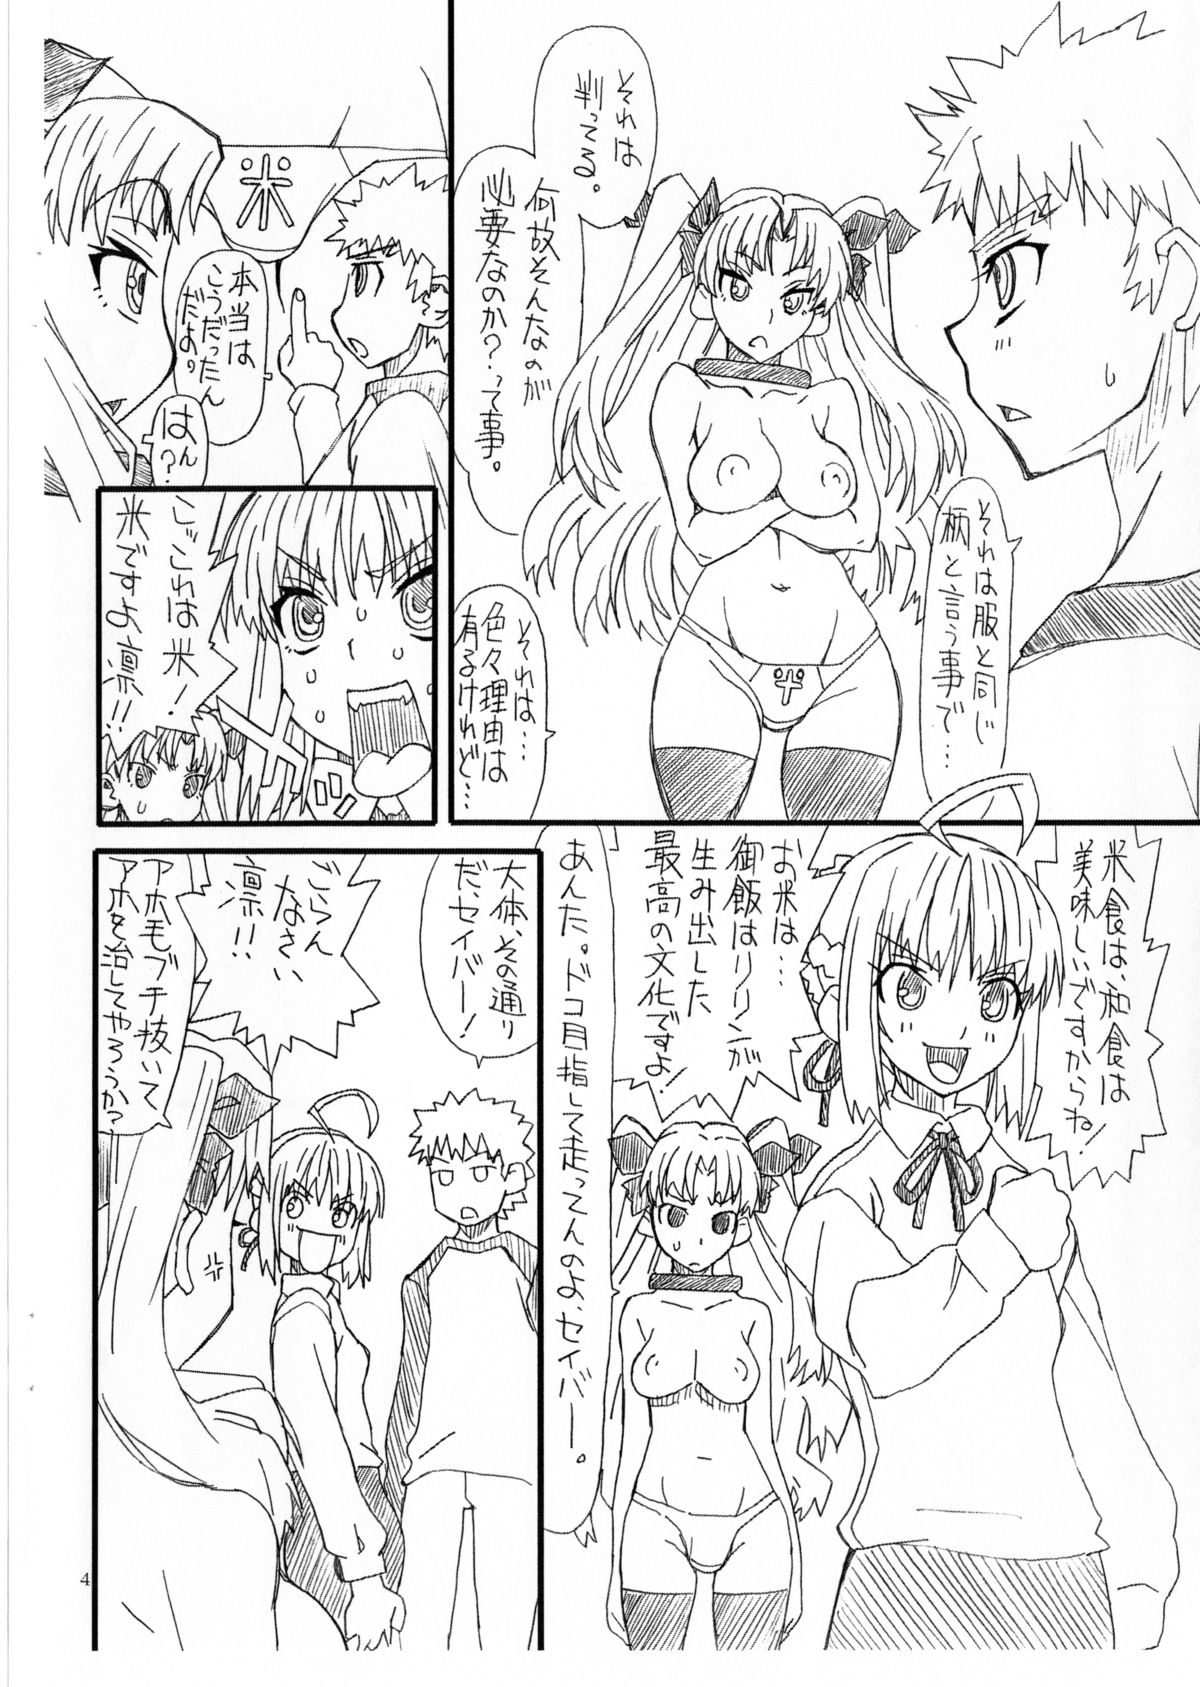 (SC65) [Power Slide (Uttorikun)] Rin to saber 1st Ver0.5 (Fate/stay night) page 5 full